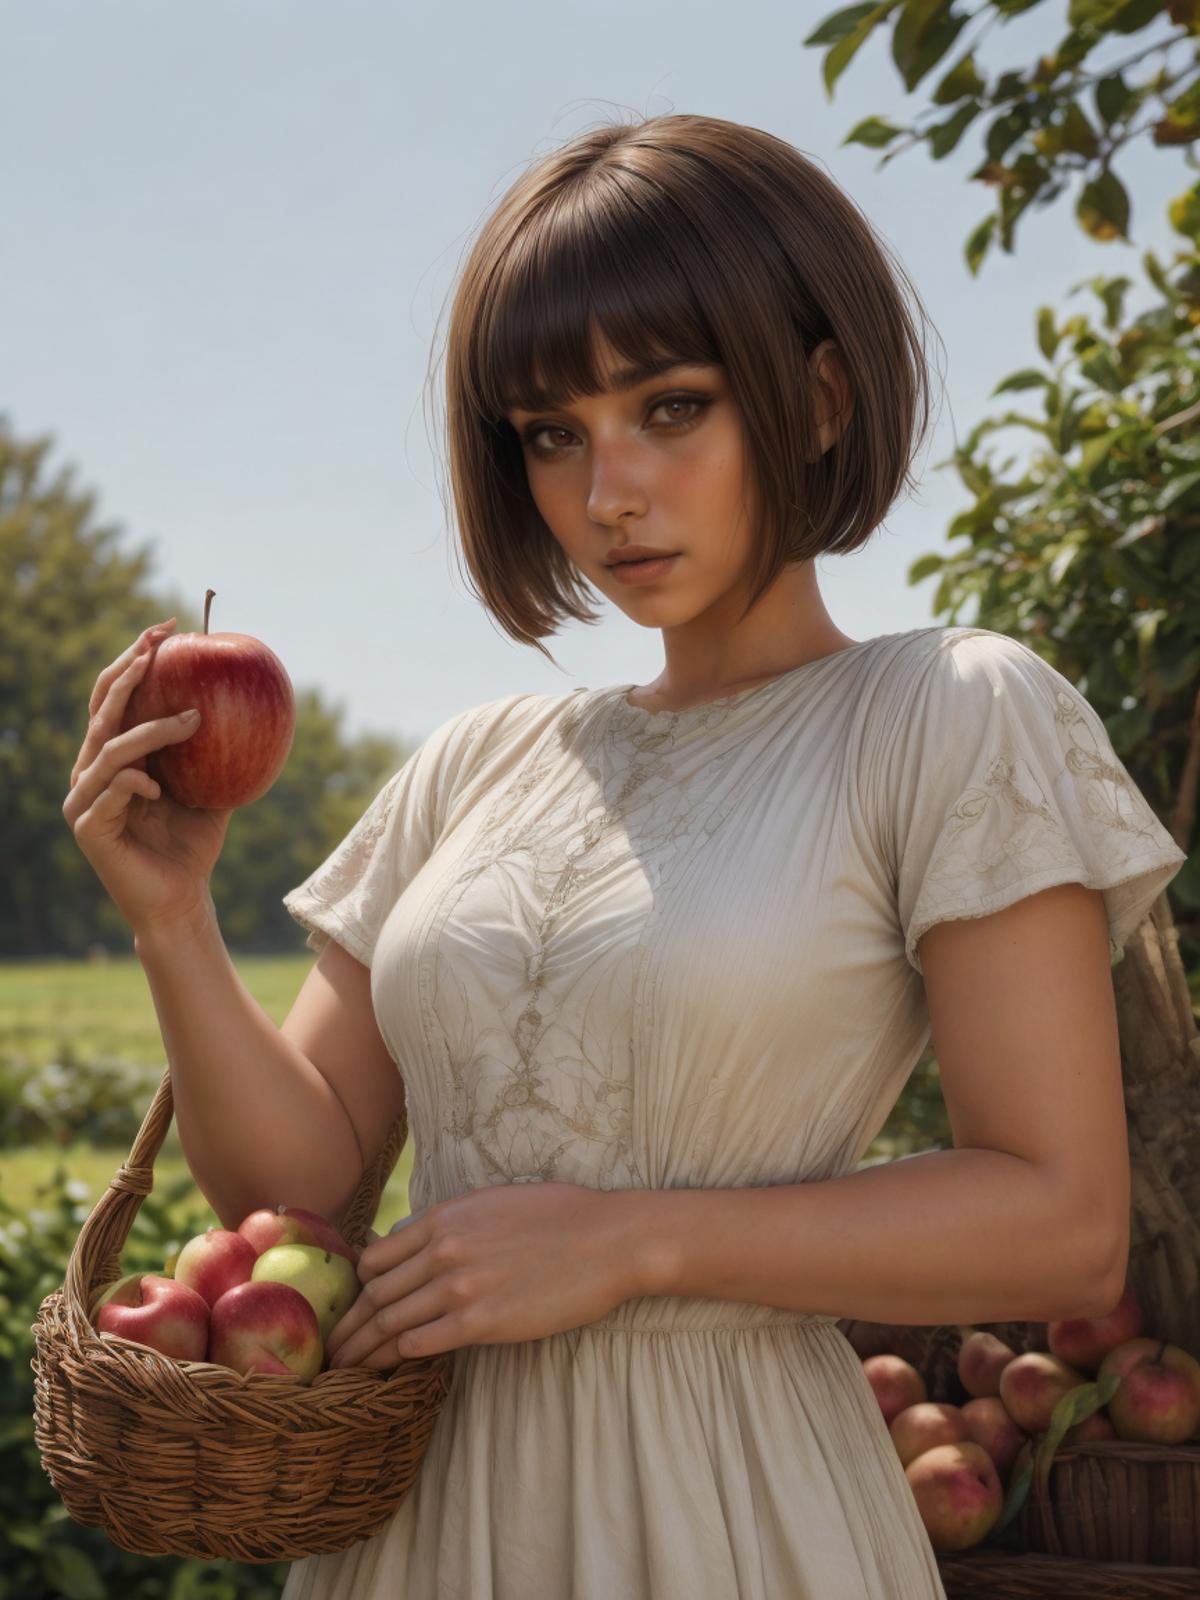 A Woman Holding an Apple and a Basket of Apples in a Garden.